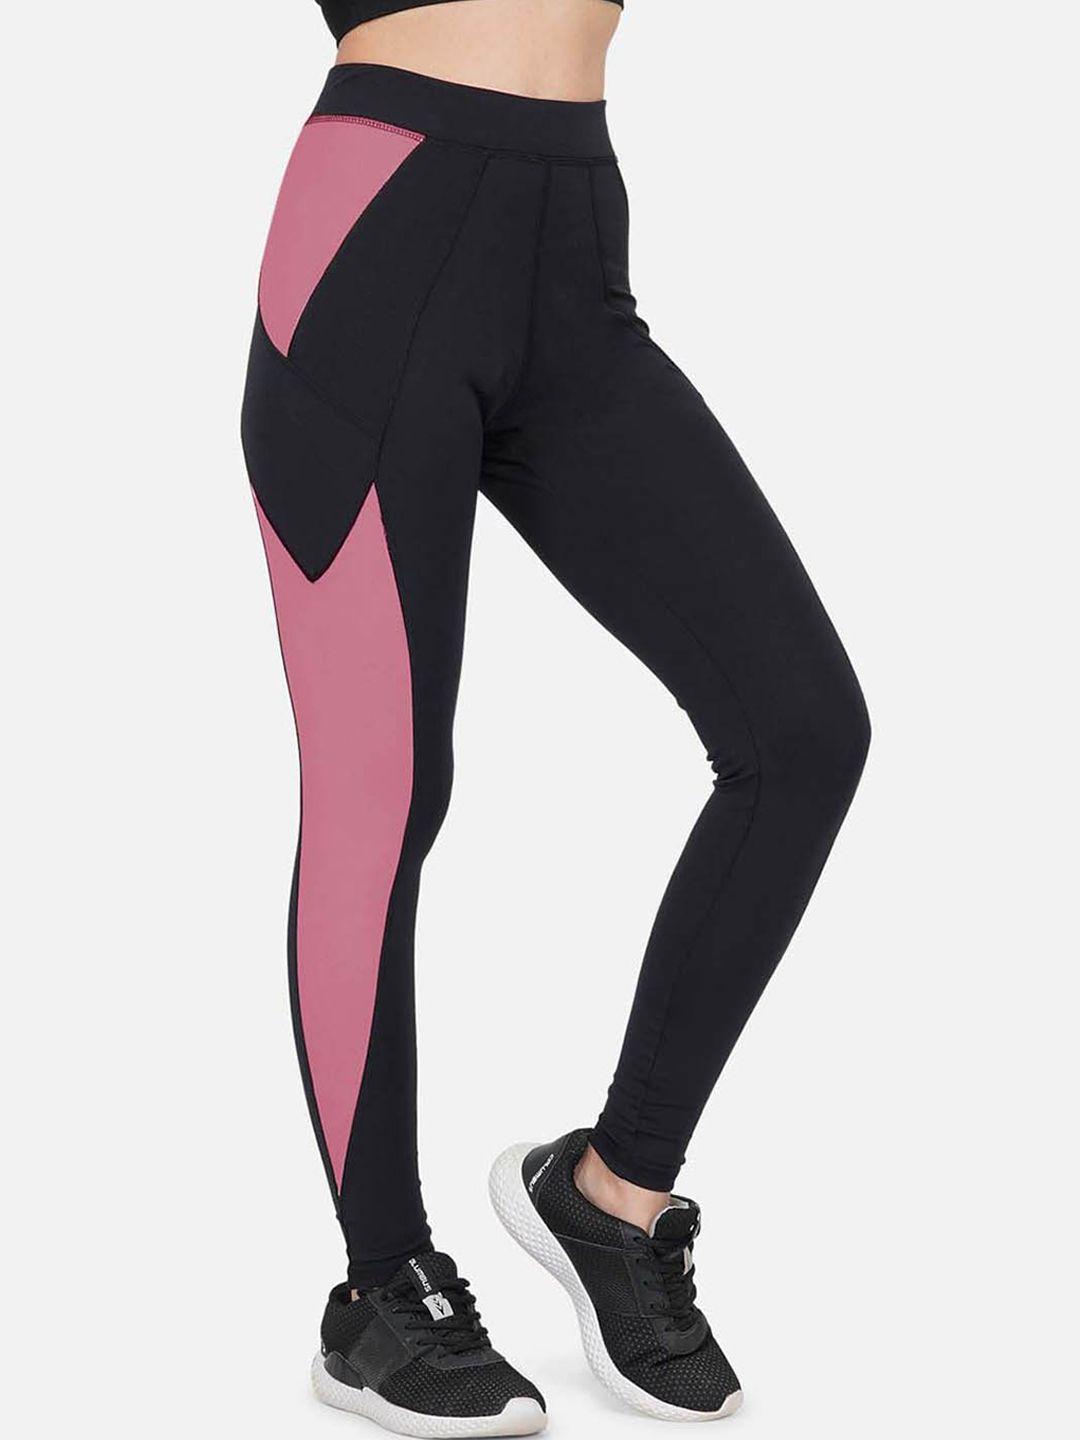 imperative women colourblocked high rise slim fit antimicrobial ankle length gym tights